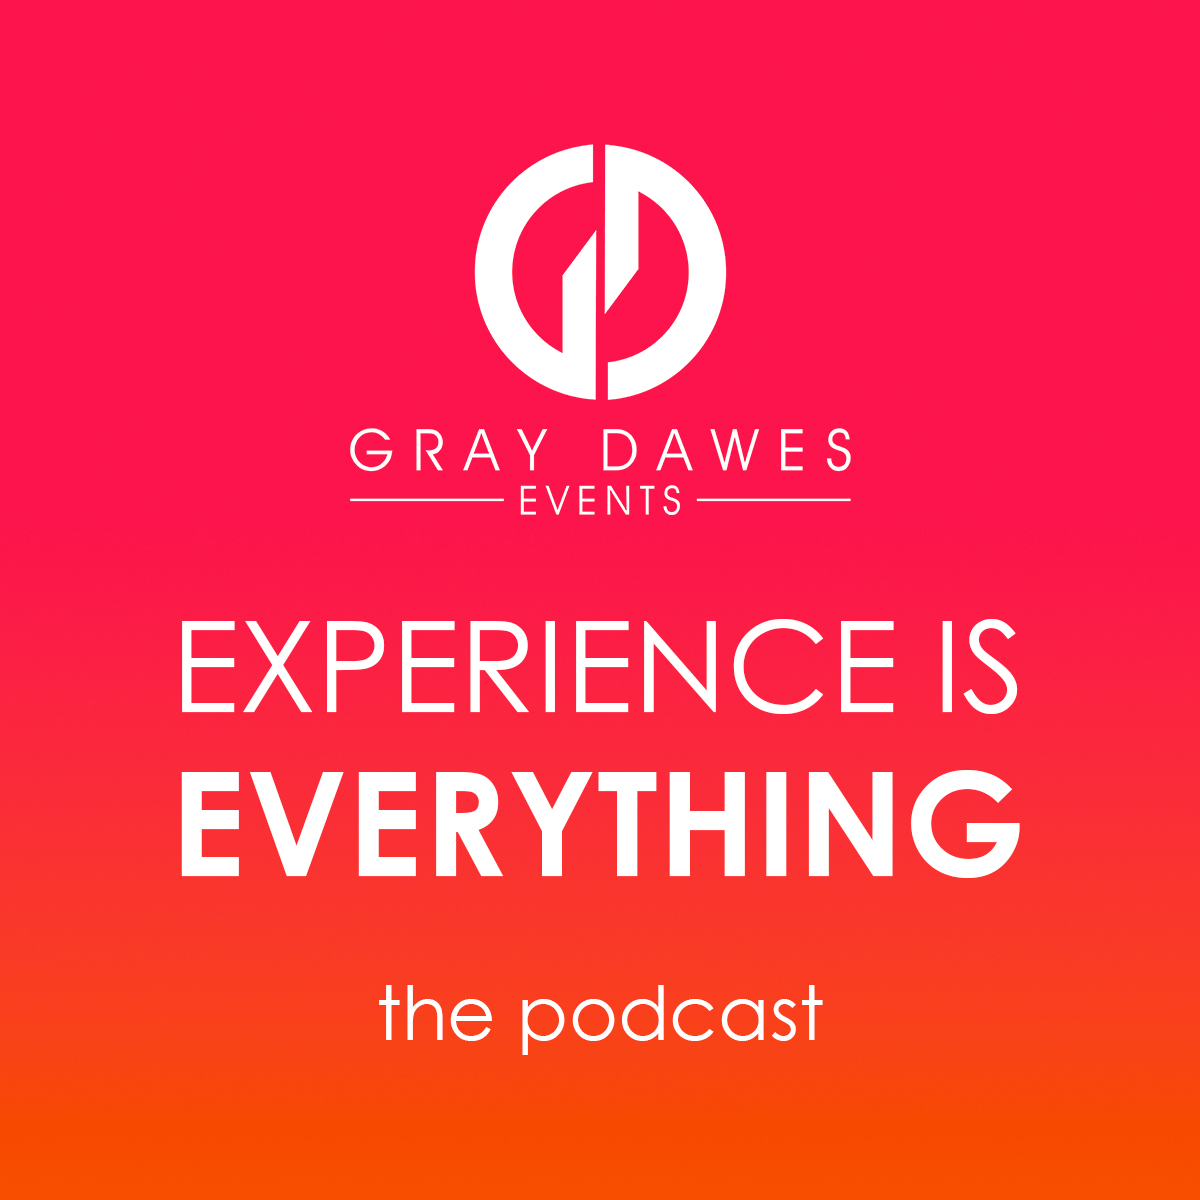 Gray Dawes Events podcast<br />
